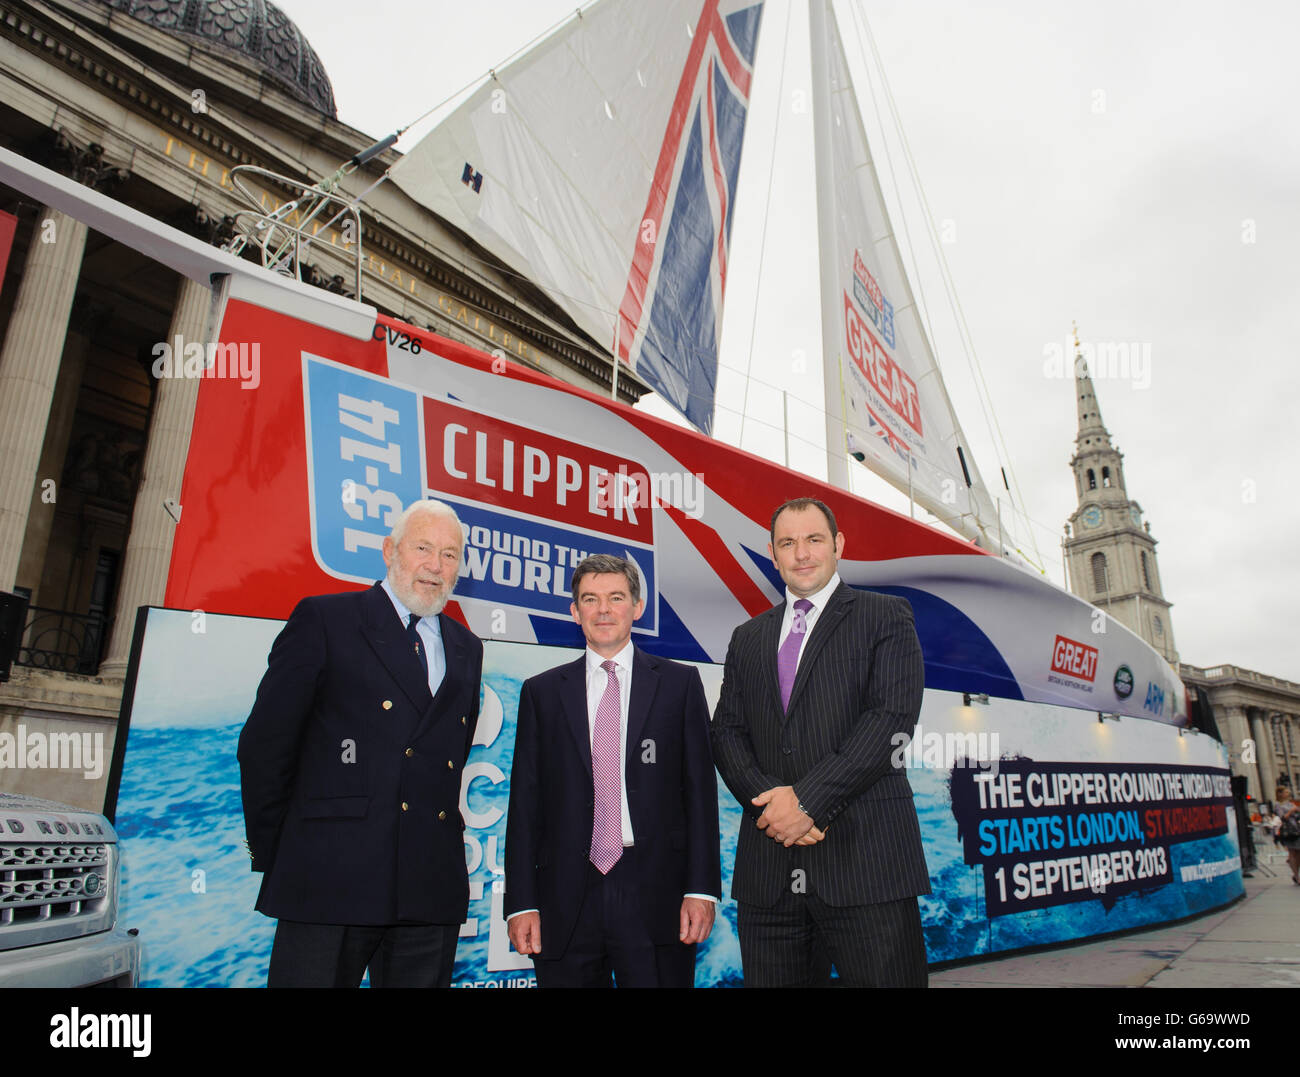 (left to right) Sir Robin Knox-Johnston, Sports Minister Hugh Robertson and Global Sponsorship Manager for Land Rover Ed Tilston at a launch event for the yacht 'Great Britain' in Trafalgar Square, London. PRESS ASSOCIATION Photo. 'Great Britain' will be the flagship of the Clipper Round the World Yacht Race, which starts on 1 September 2013. Picture date: Wednesday July 31, 2013. Photo credit should read: Dominic Lipinski/PA Wire Stock Photo